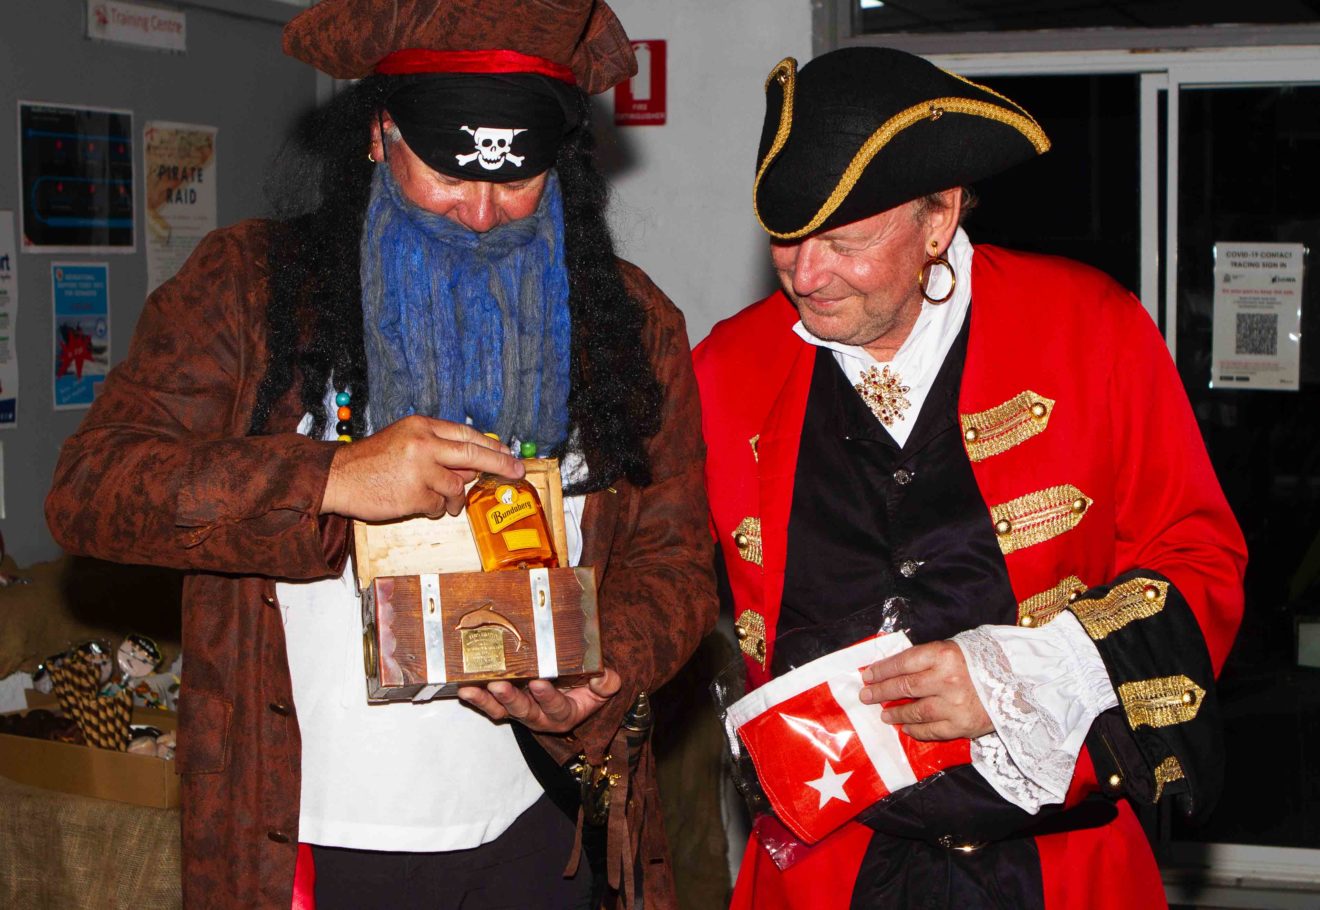 IMG_3980 The Pirates Chest